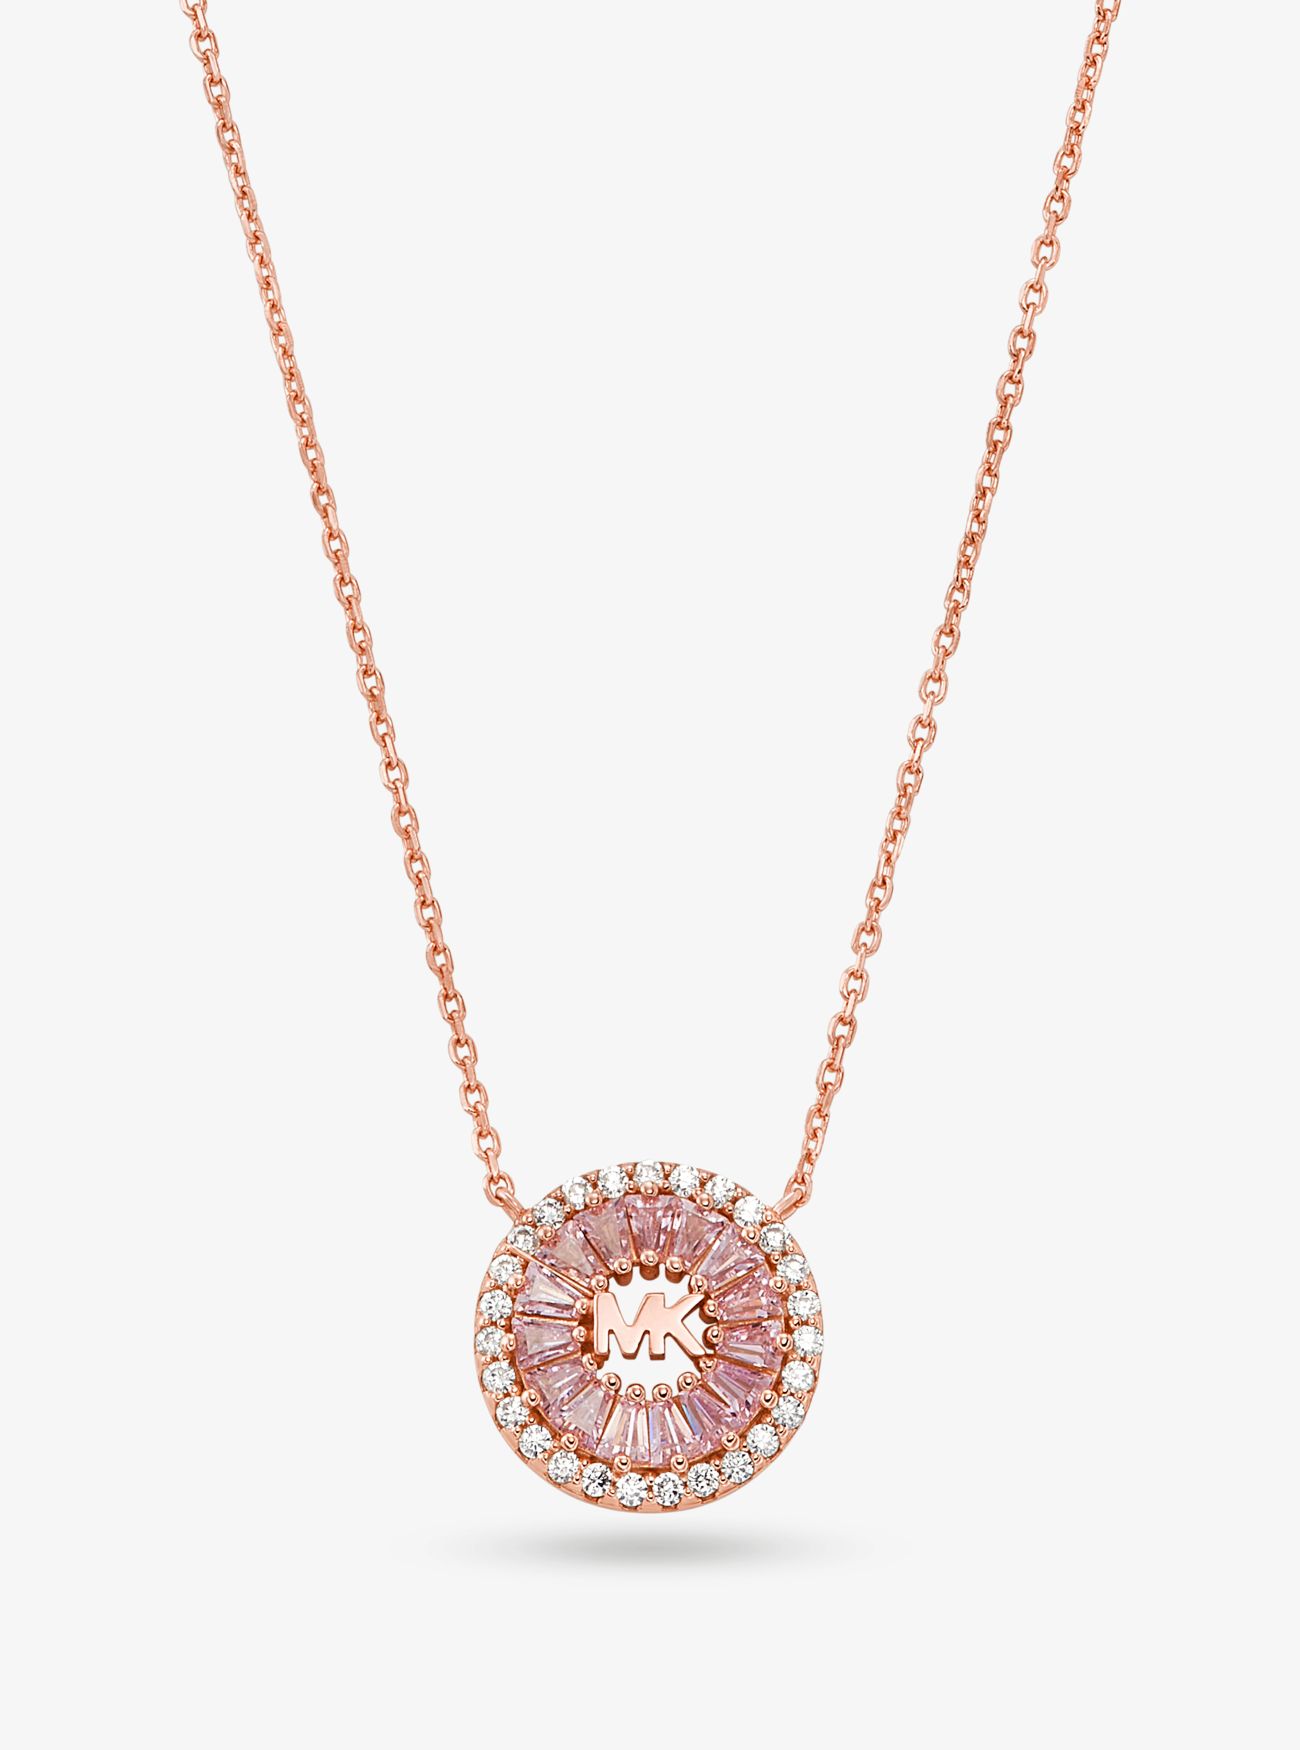 MK Precious Metal-Plated Sterling Silver Pavé Halo Necklace - Rose Gold - Michael Kors